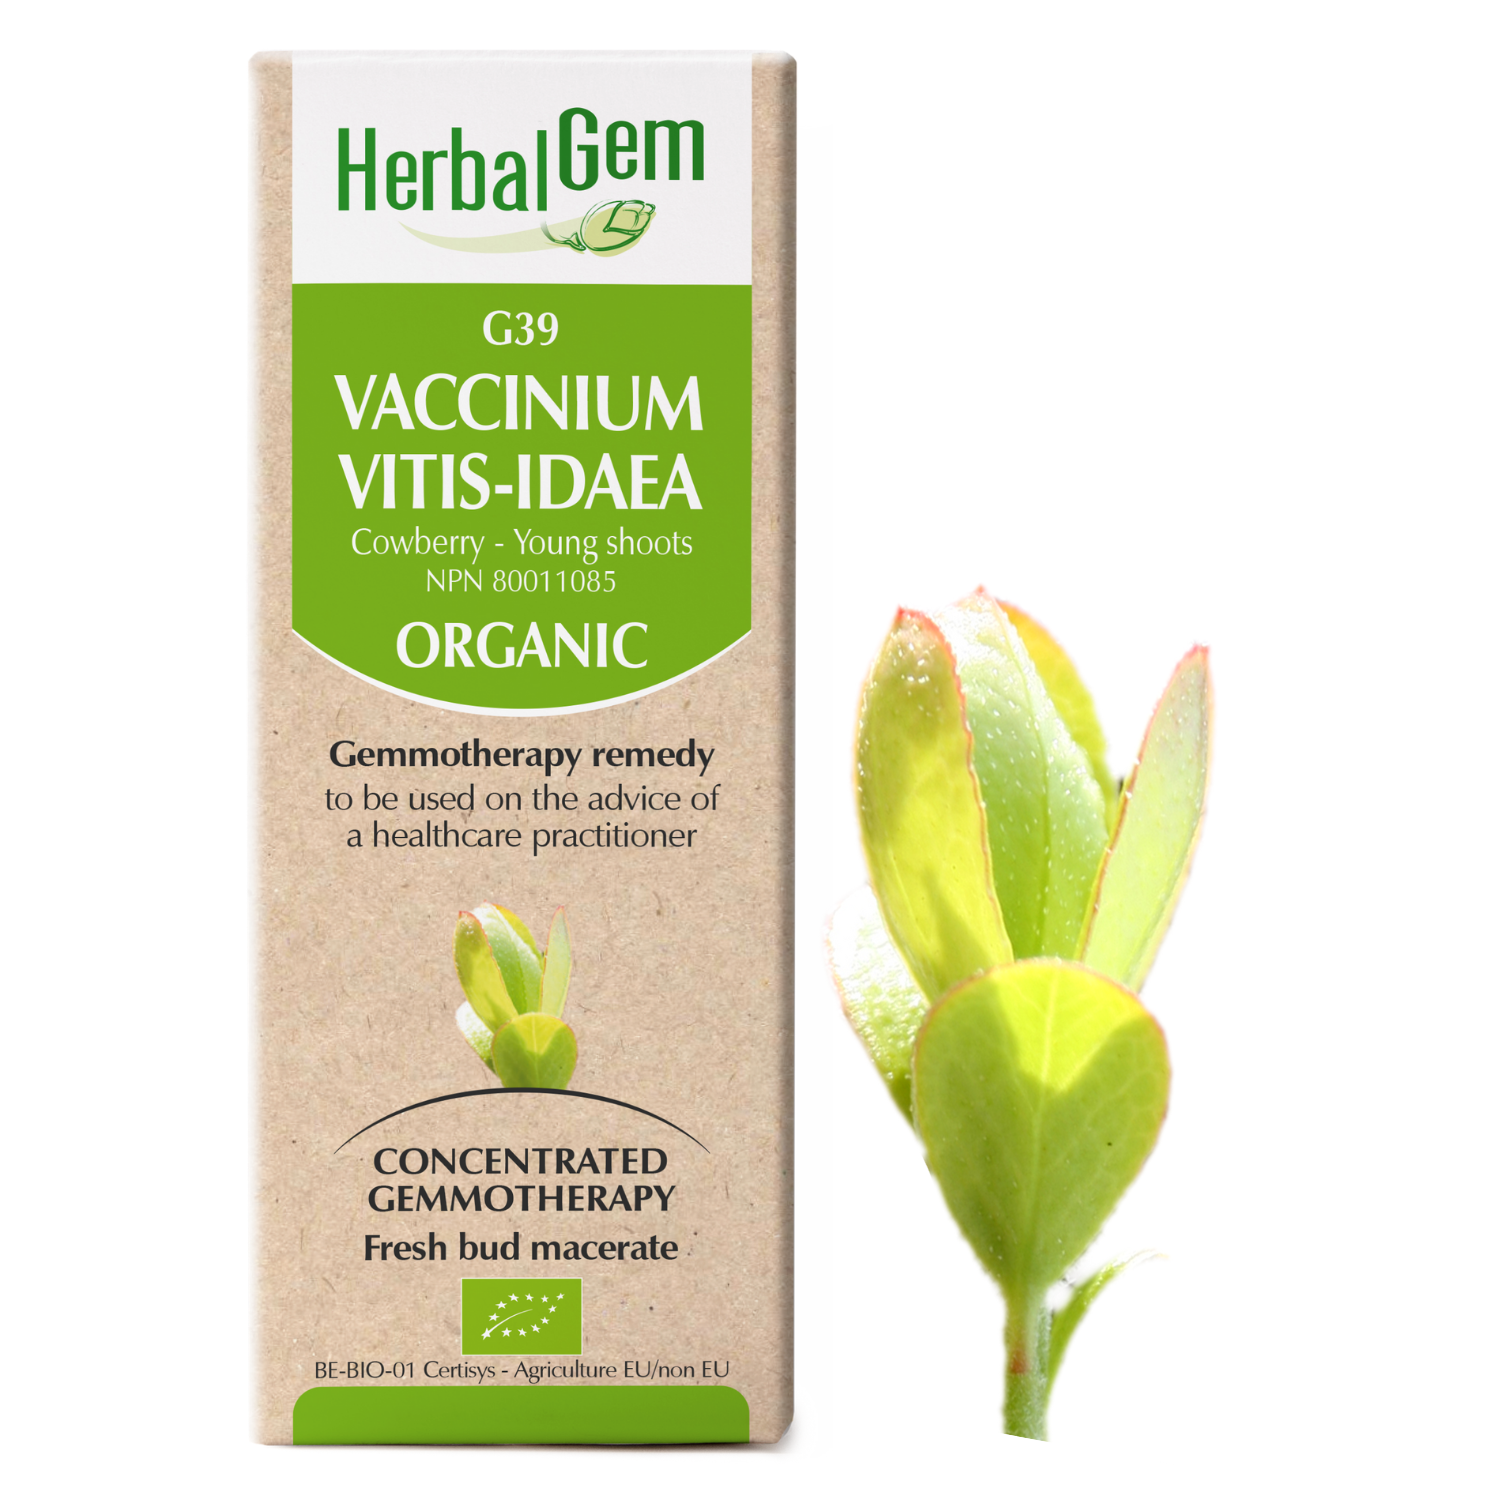 G39 Vaccinium vitis-idaea Gemmotherapy remedy Organic Cowberry Young shoots